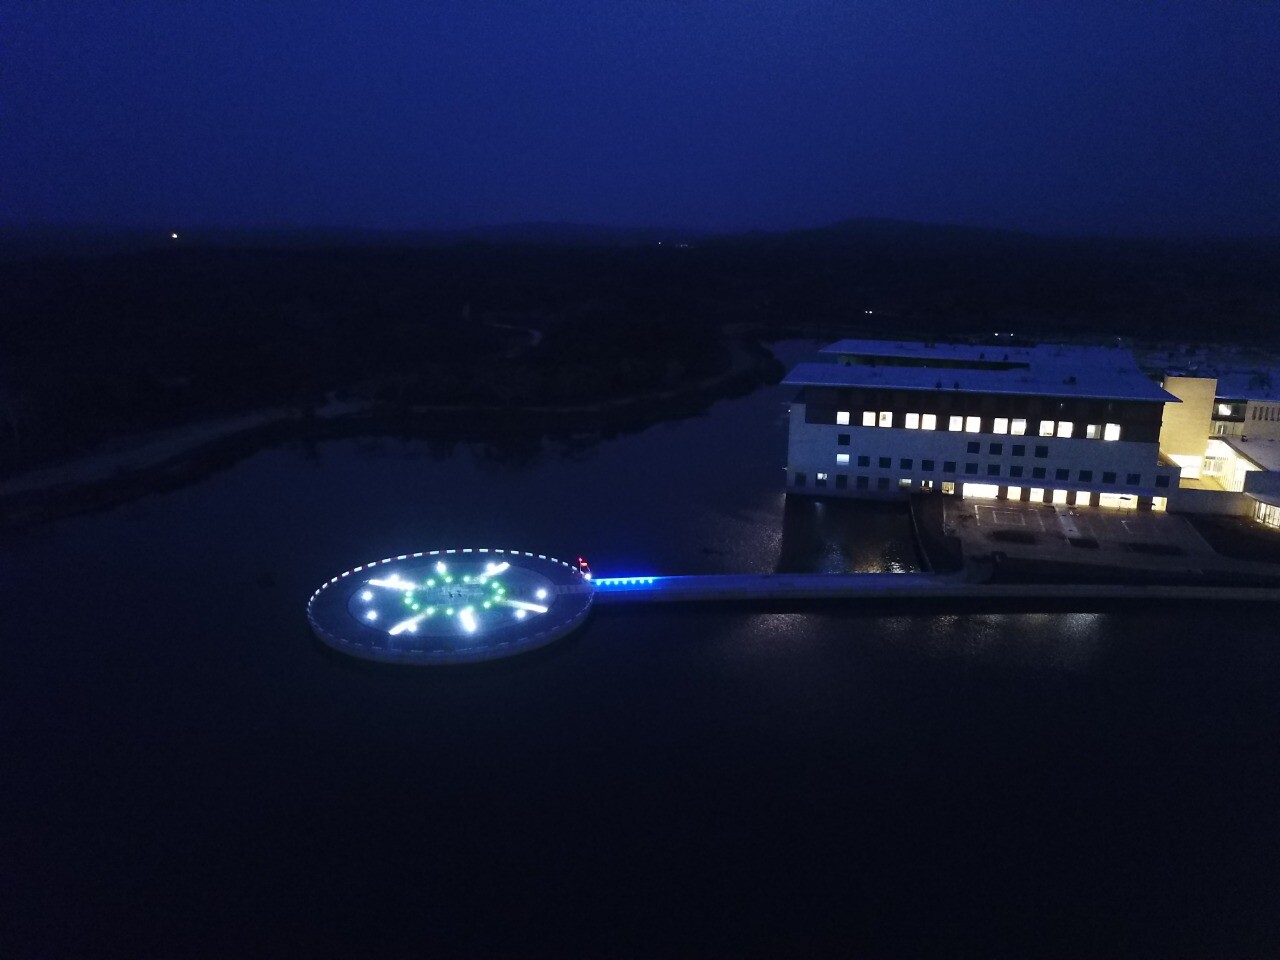 Heliport Columbia at night